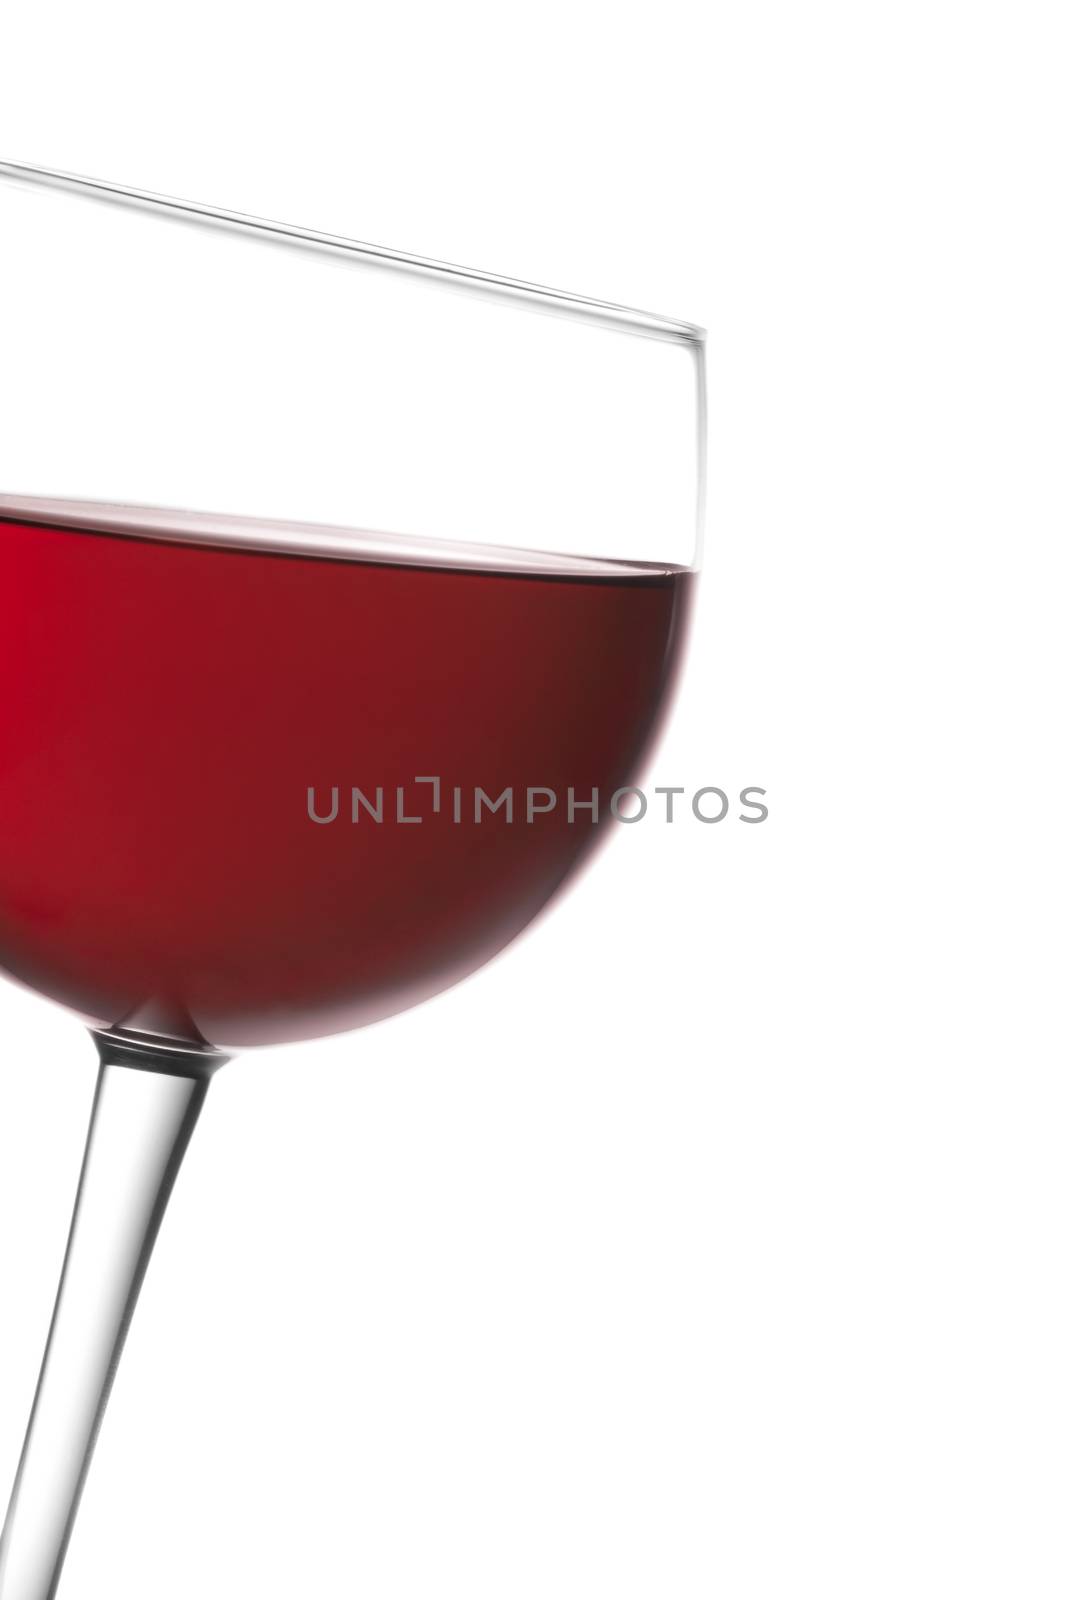 glass of red wine tilted with space for text  by donfiore